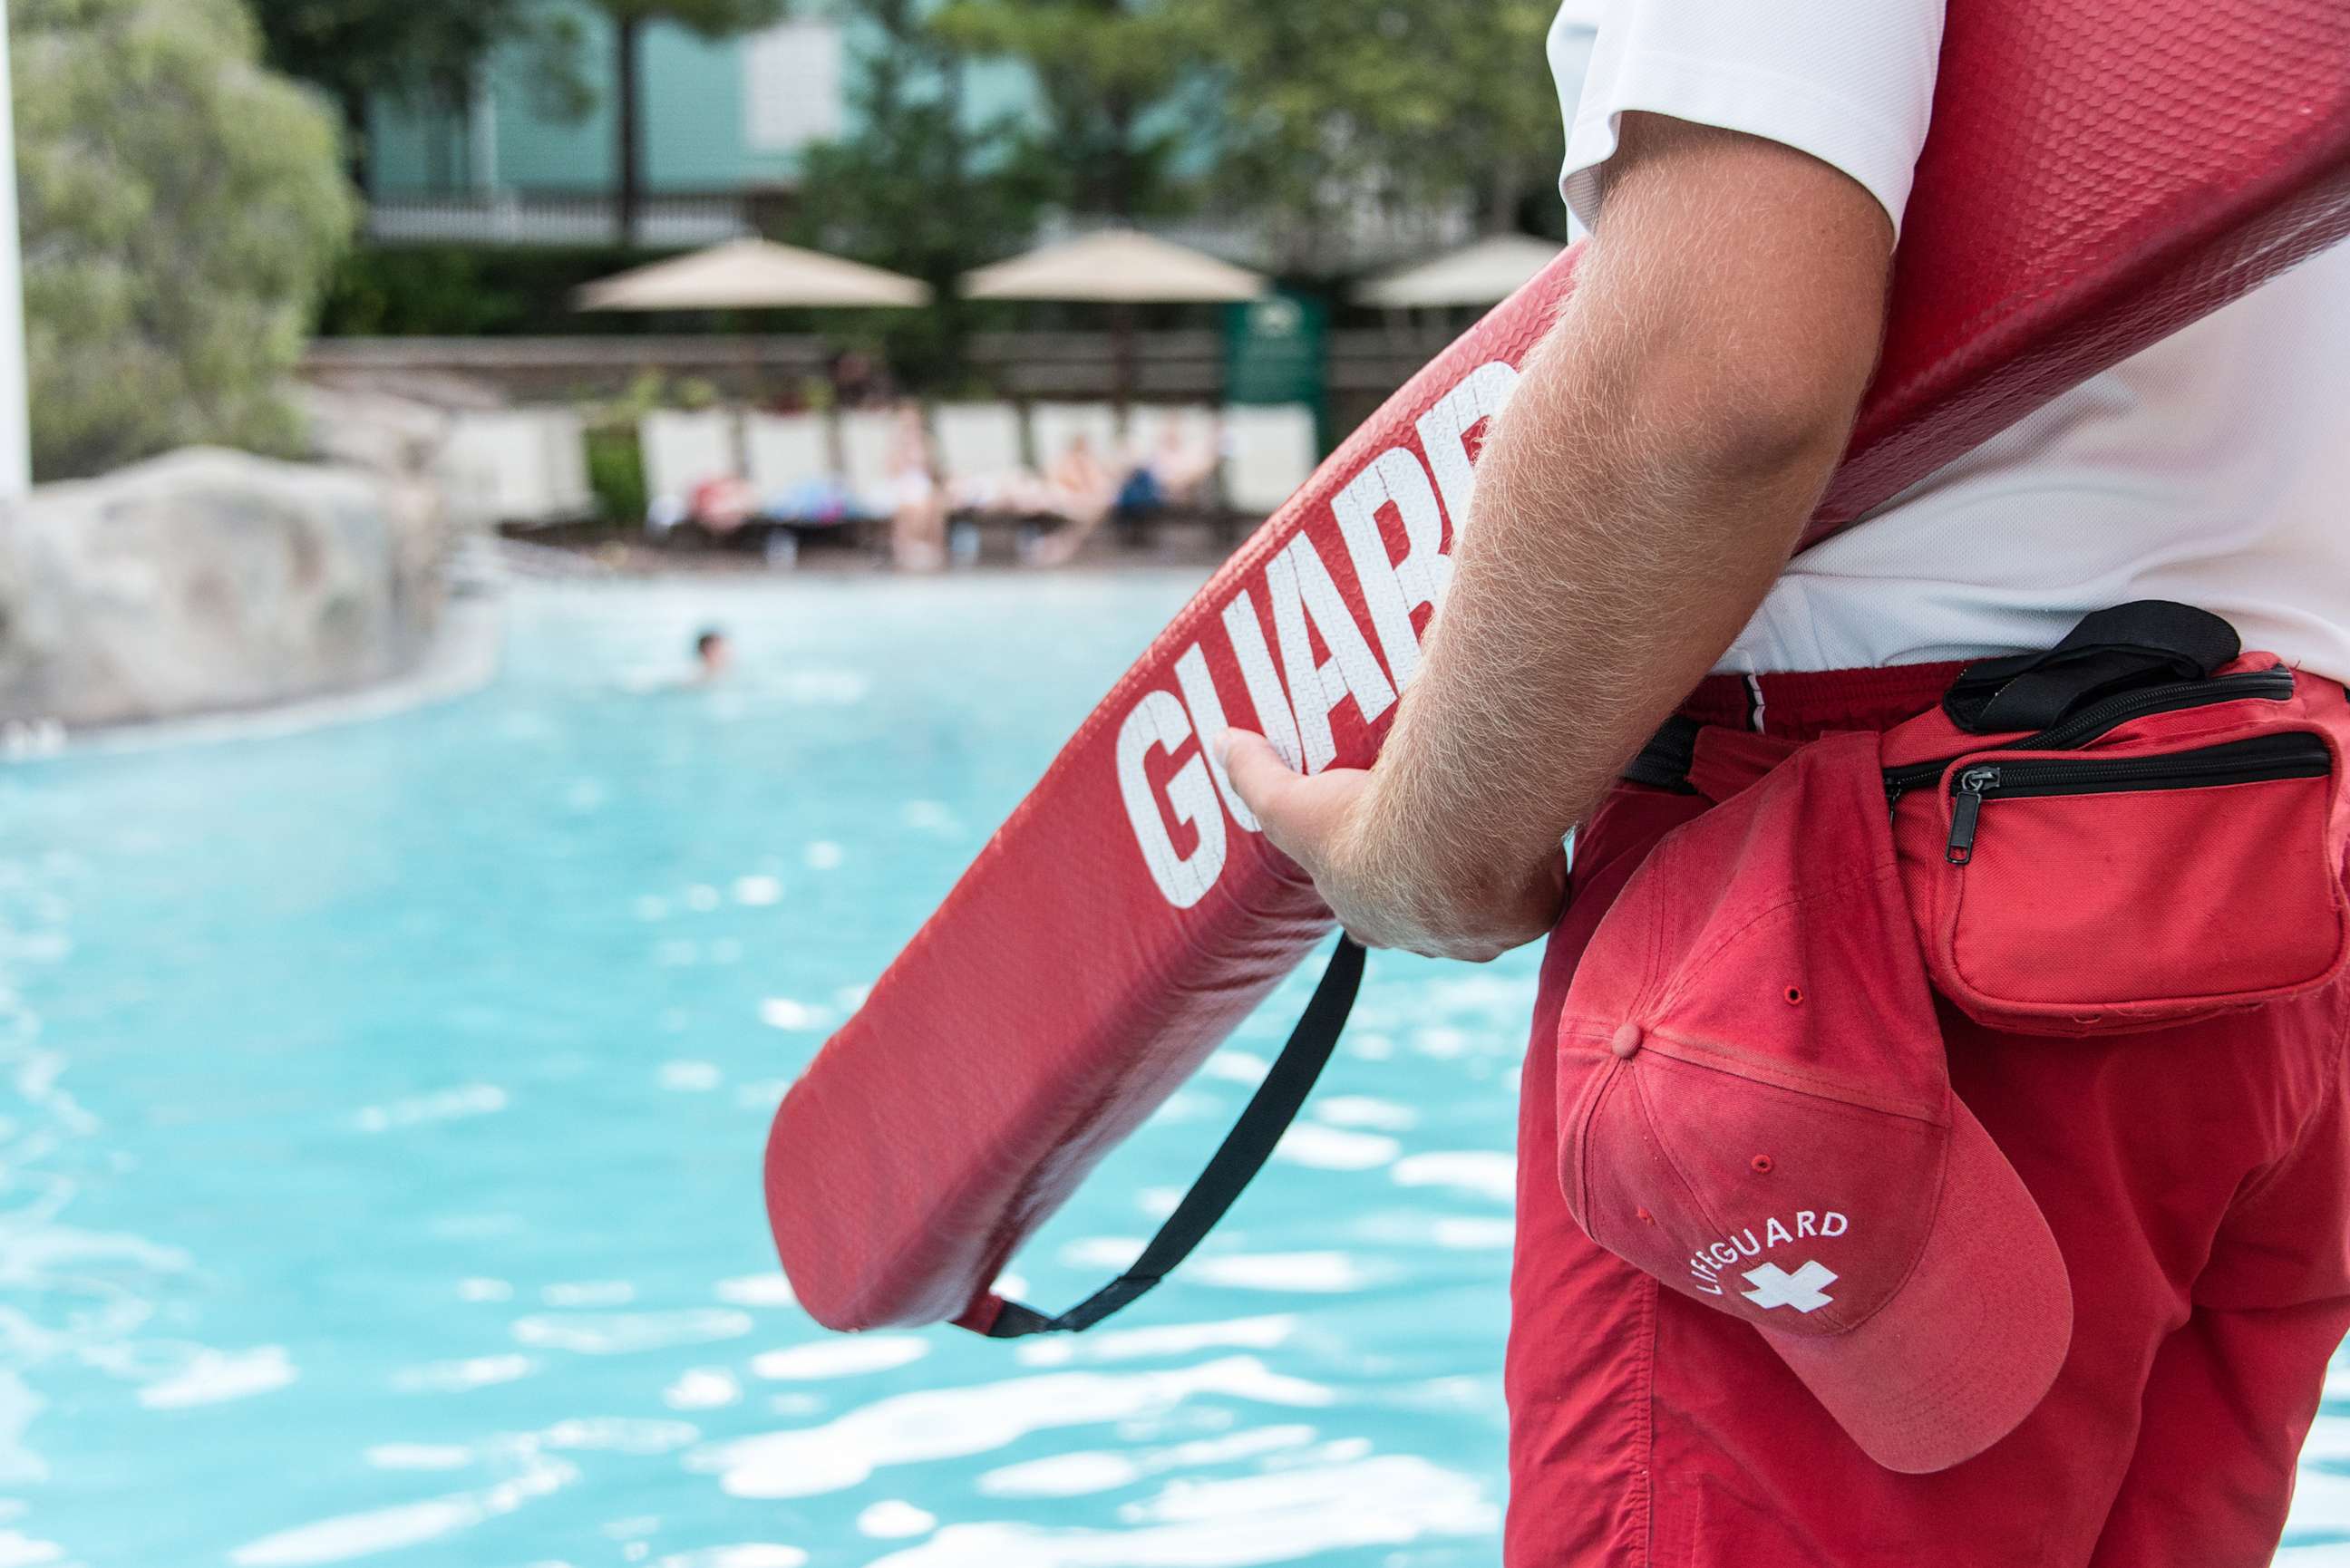 PHOTO: A lifeguard watches a swimming pool in an undated stock photo.